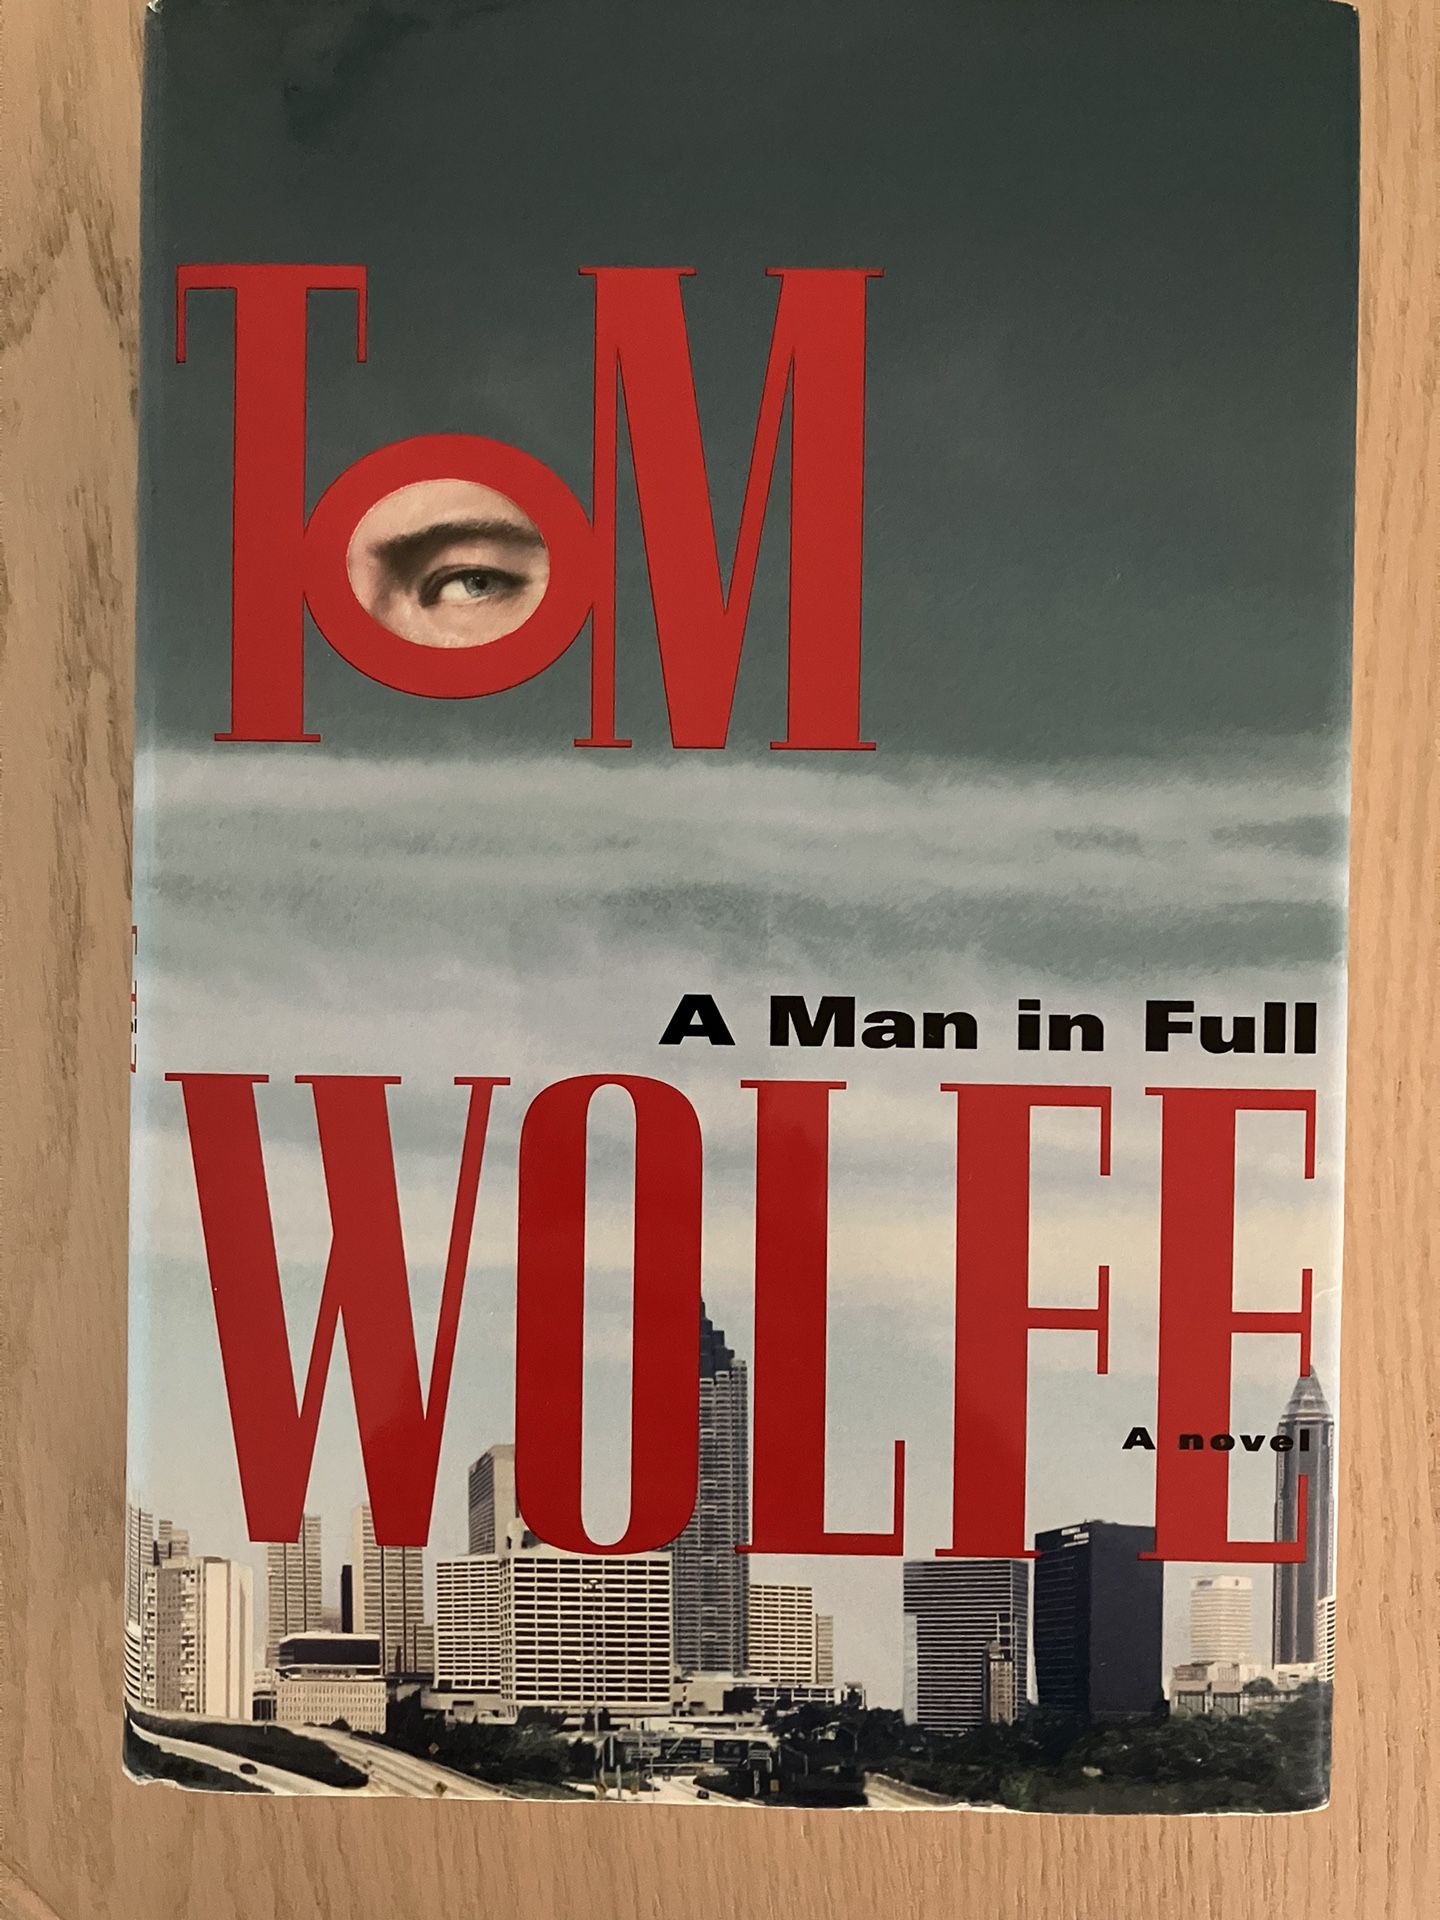 Hardcover Tom Wolfe “A Man In Full”